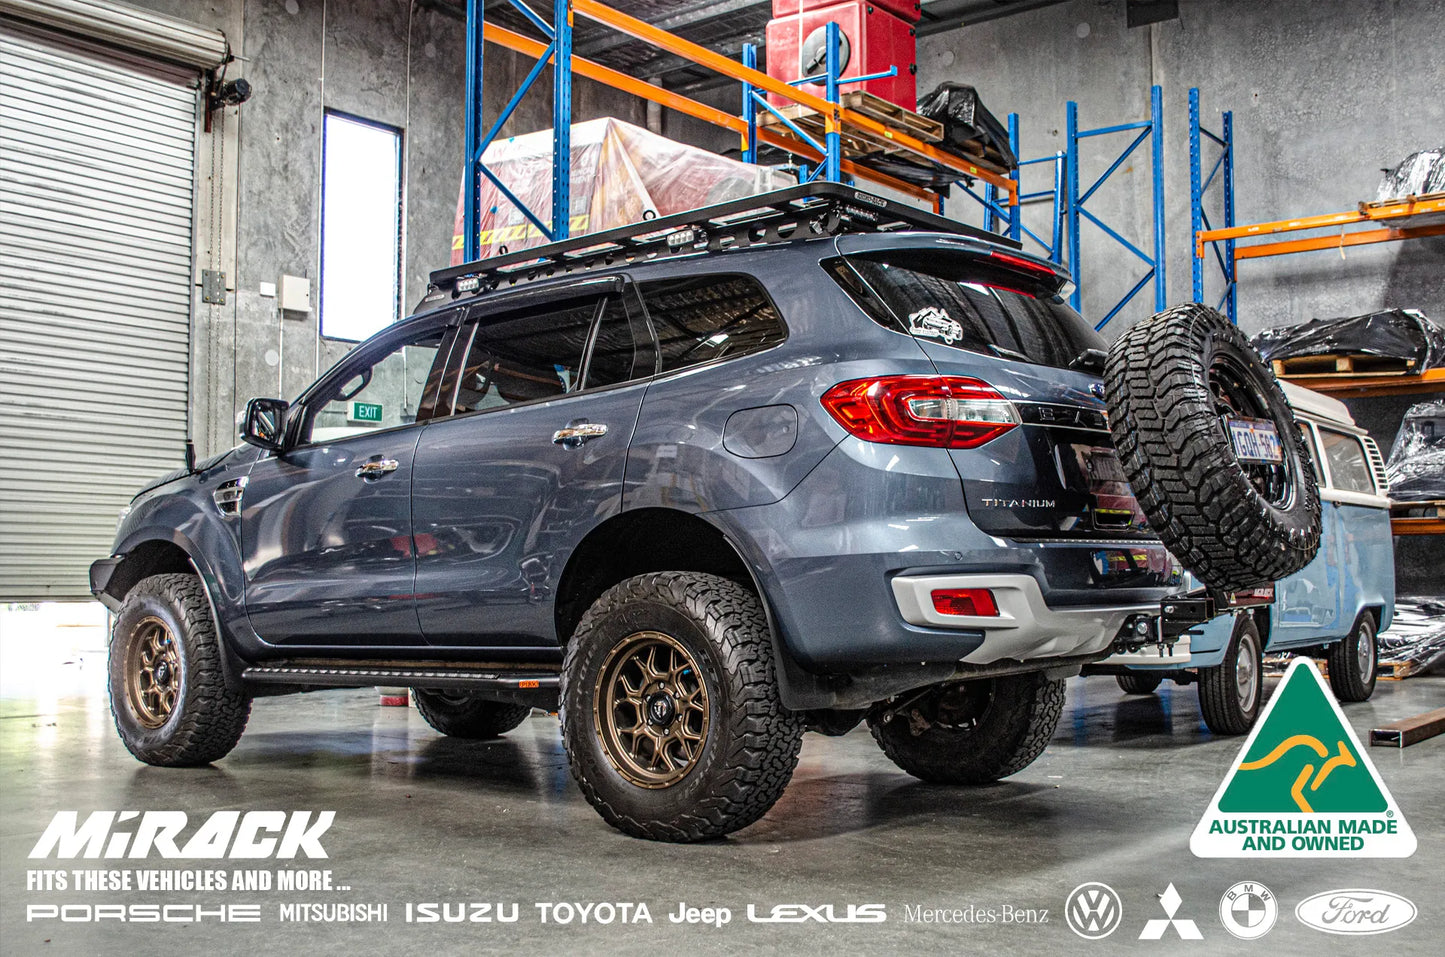 Maximize your Ford Everest's towing and storage potential with Mirack's tilting spare tyre carrier on the tow hitch.